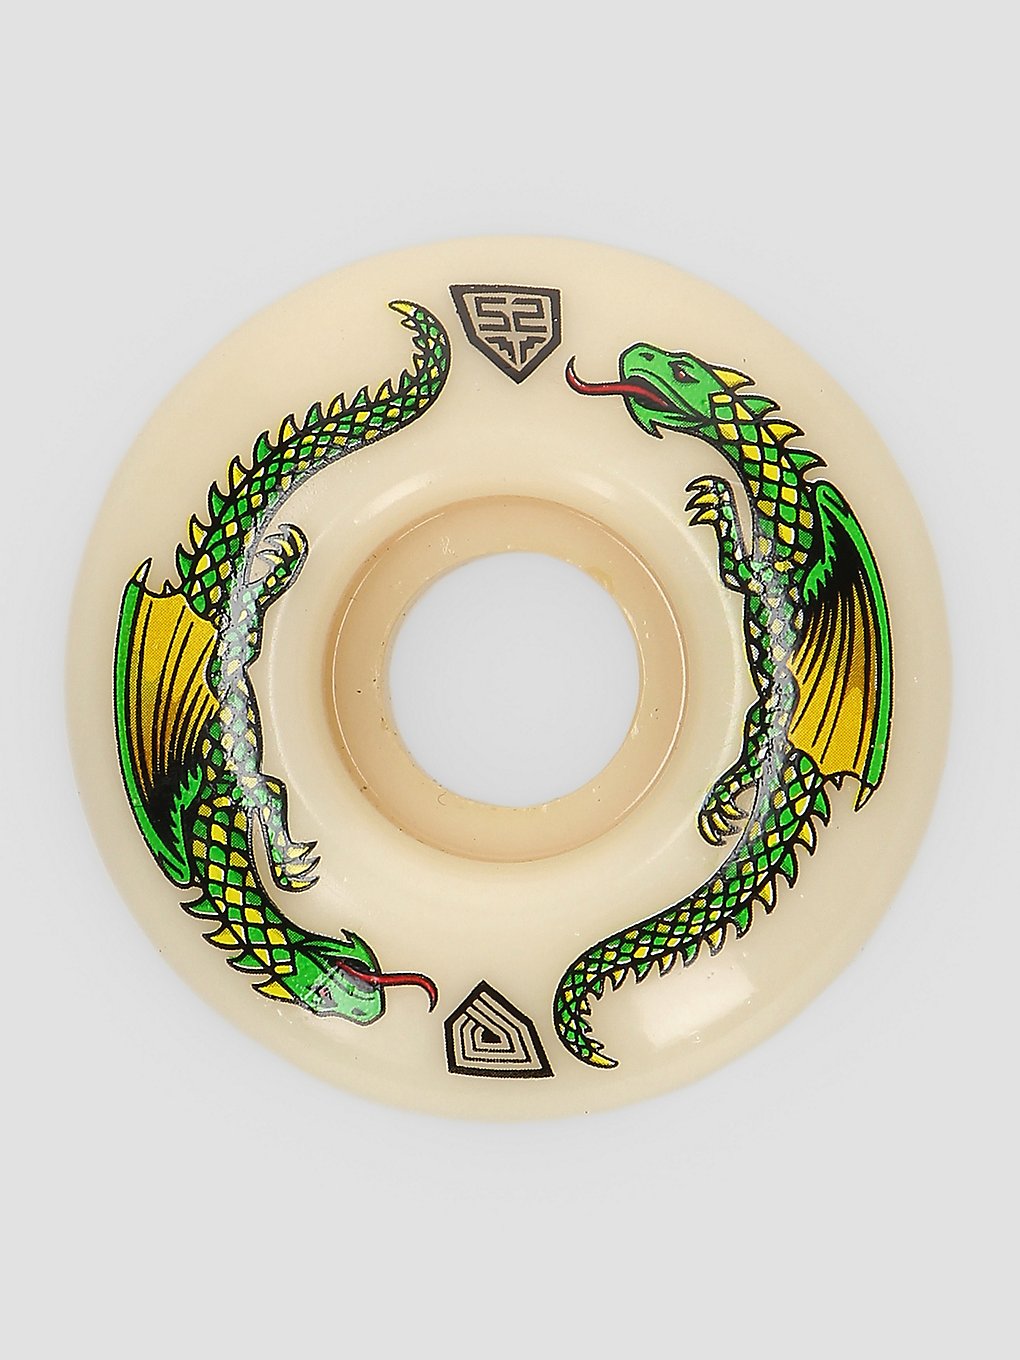 Image of Powell Peralta Dragons 93A V1 Standard 52mm Ruote bianco